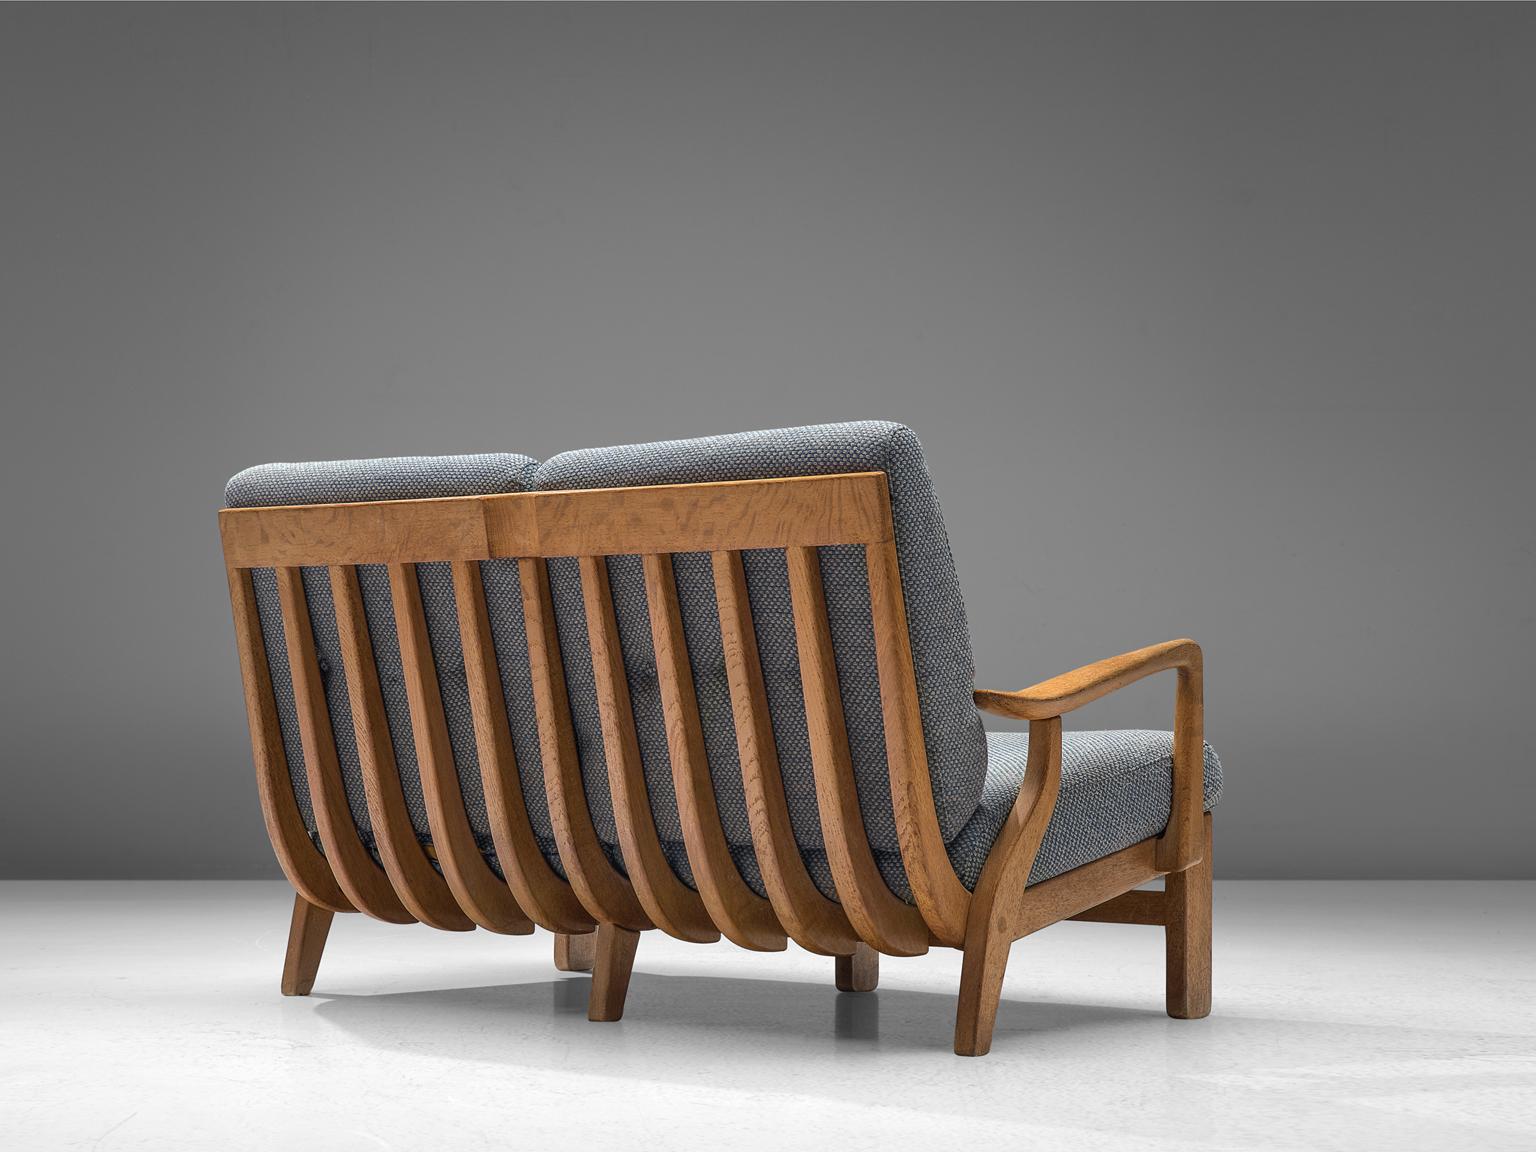 Guillerme & Chambron, sofa, oak, fabric, France, 1960s. 

Beautiful two-seat settee by Guillerme & Chambron, in solid oak. The back of the seat has been beautifully finished with wooden slats which adds an original and interesting character to the